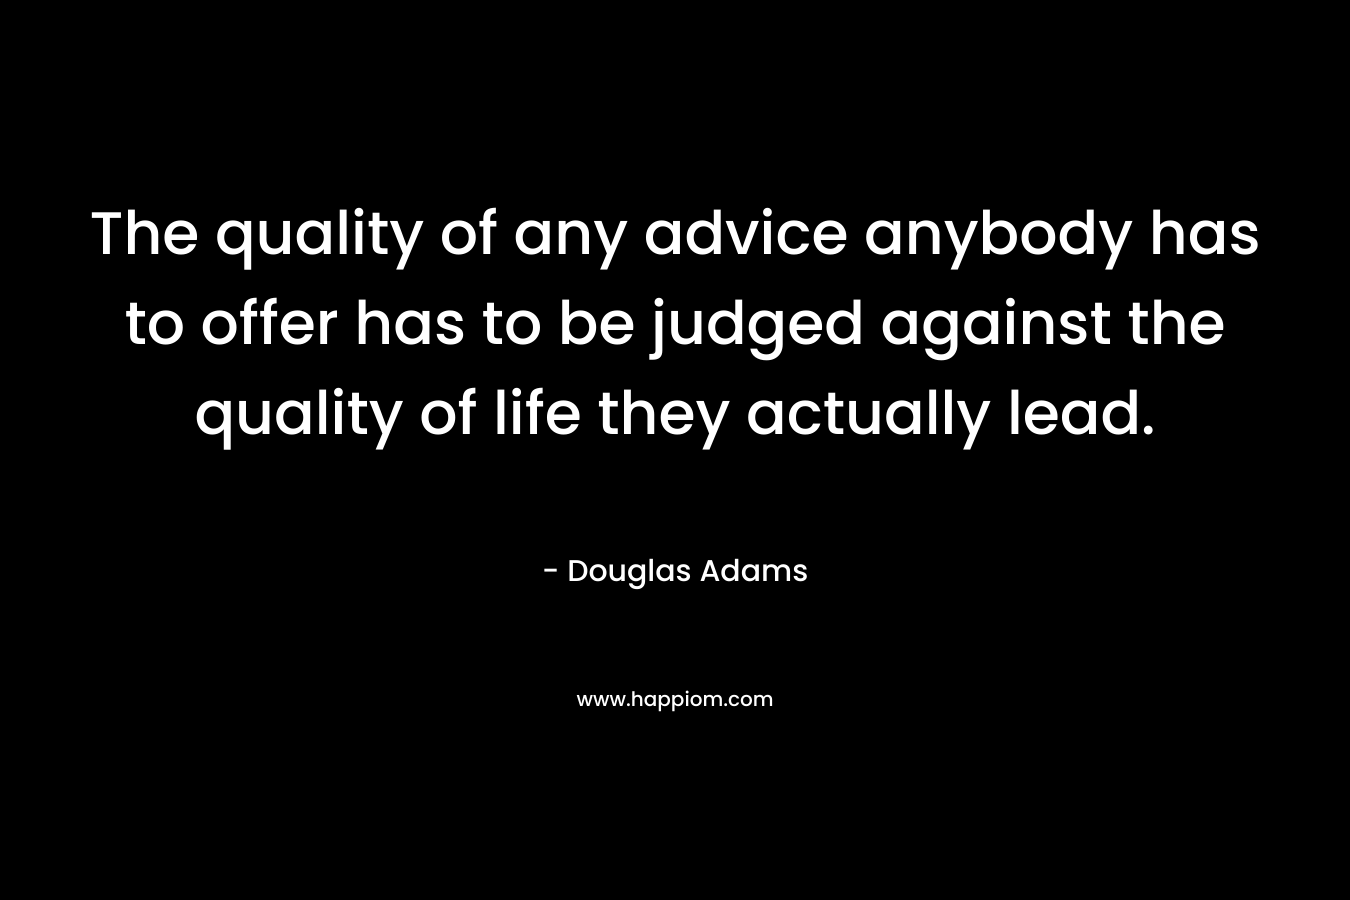 The quality of any advice anybody has to offer has to be judged against the quality of life they actually lead.